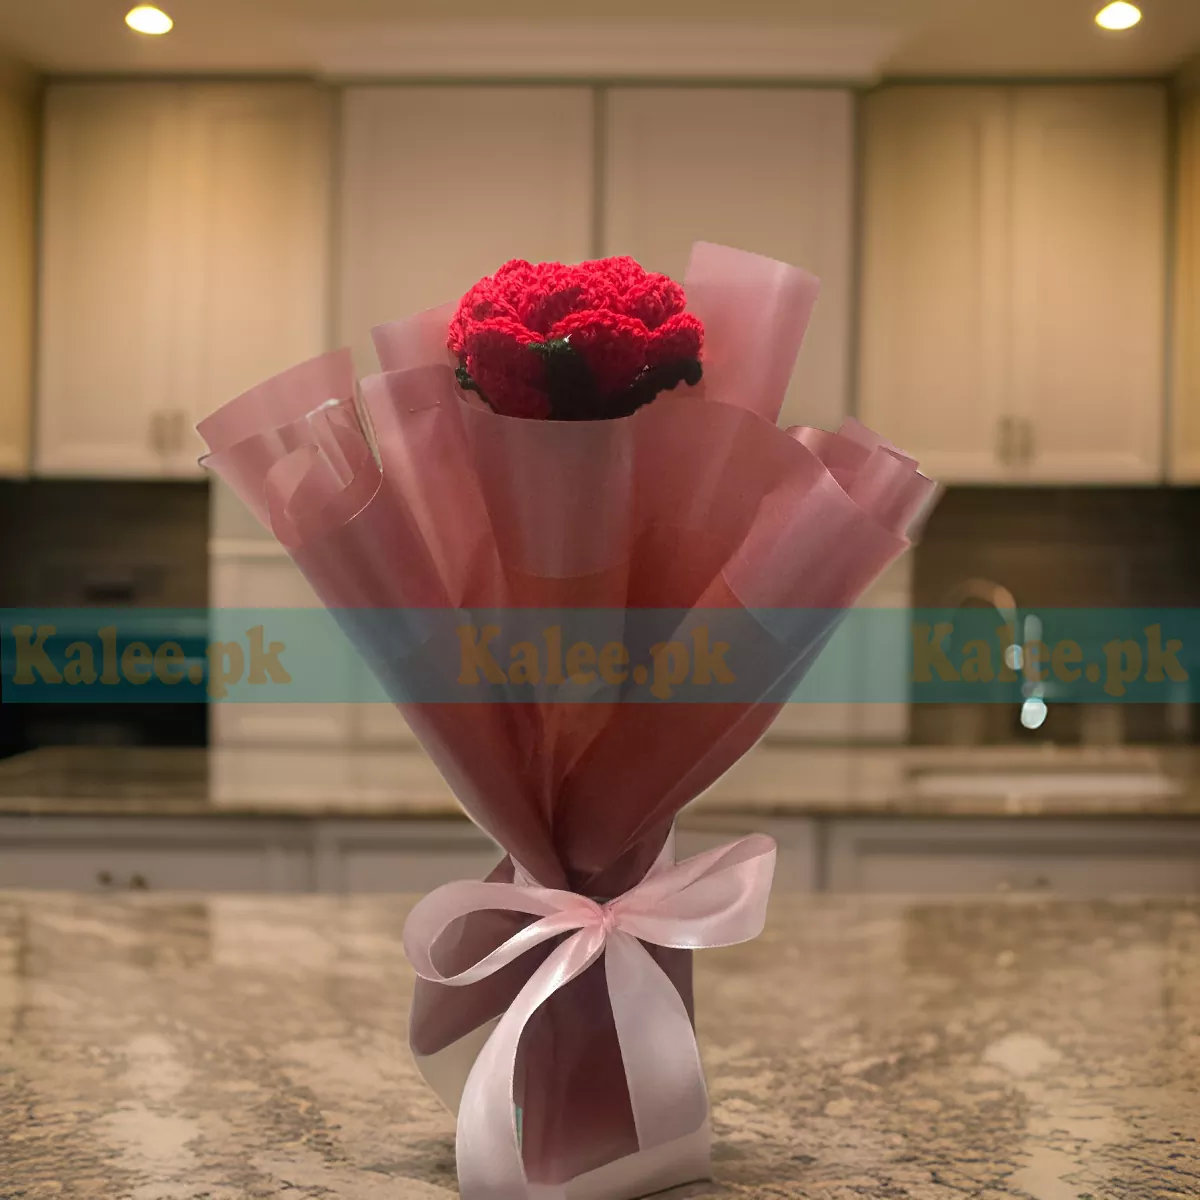 A lavish crochet bouquet featuring extravagant handcrafted red roses